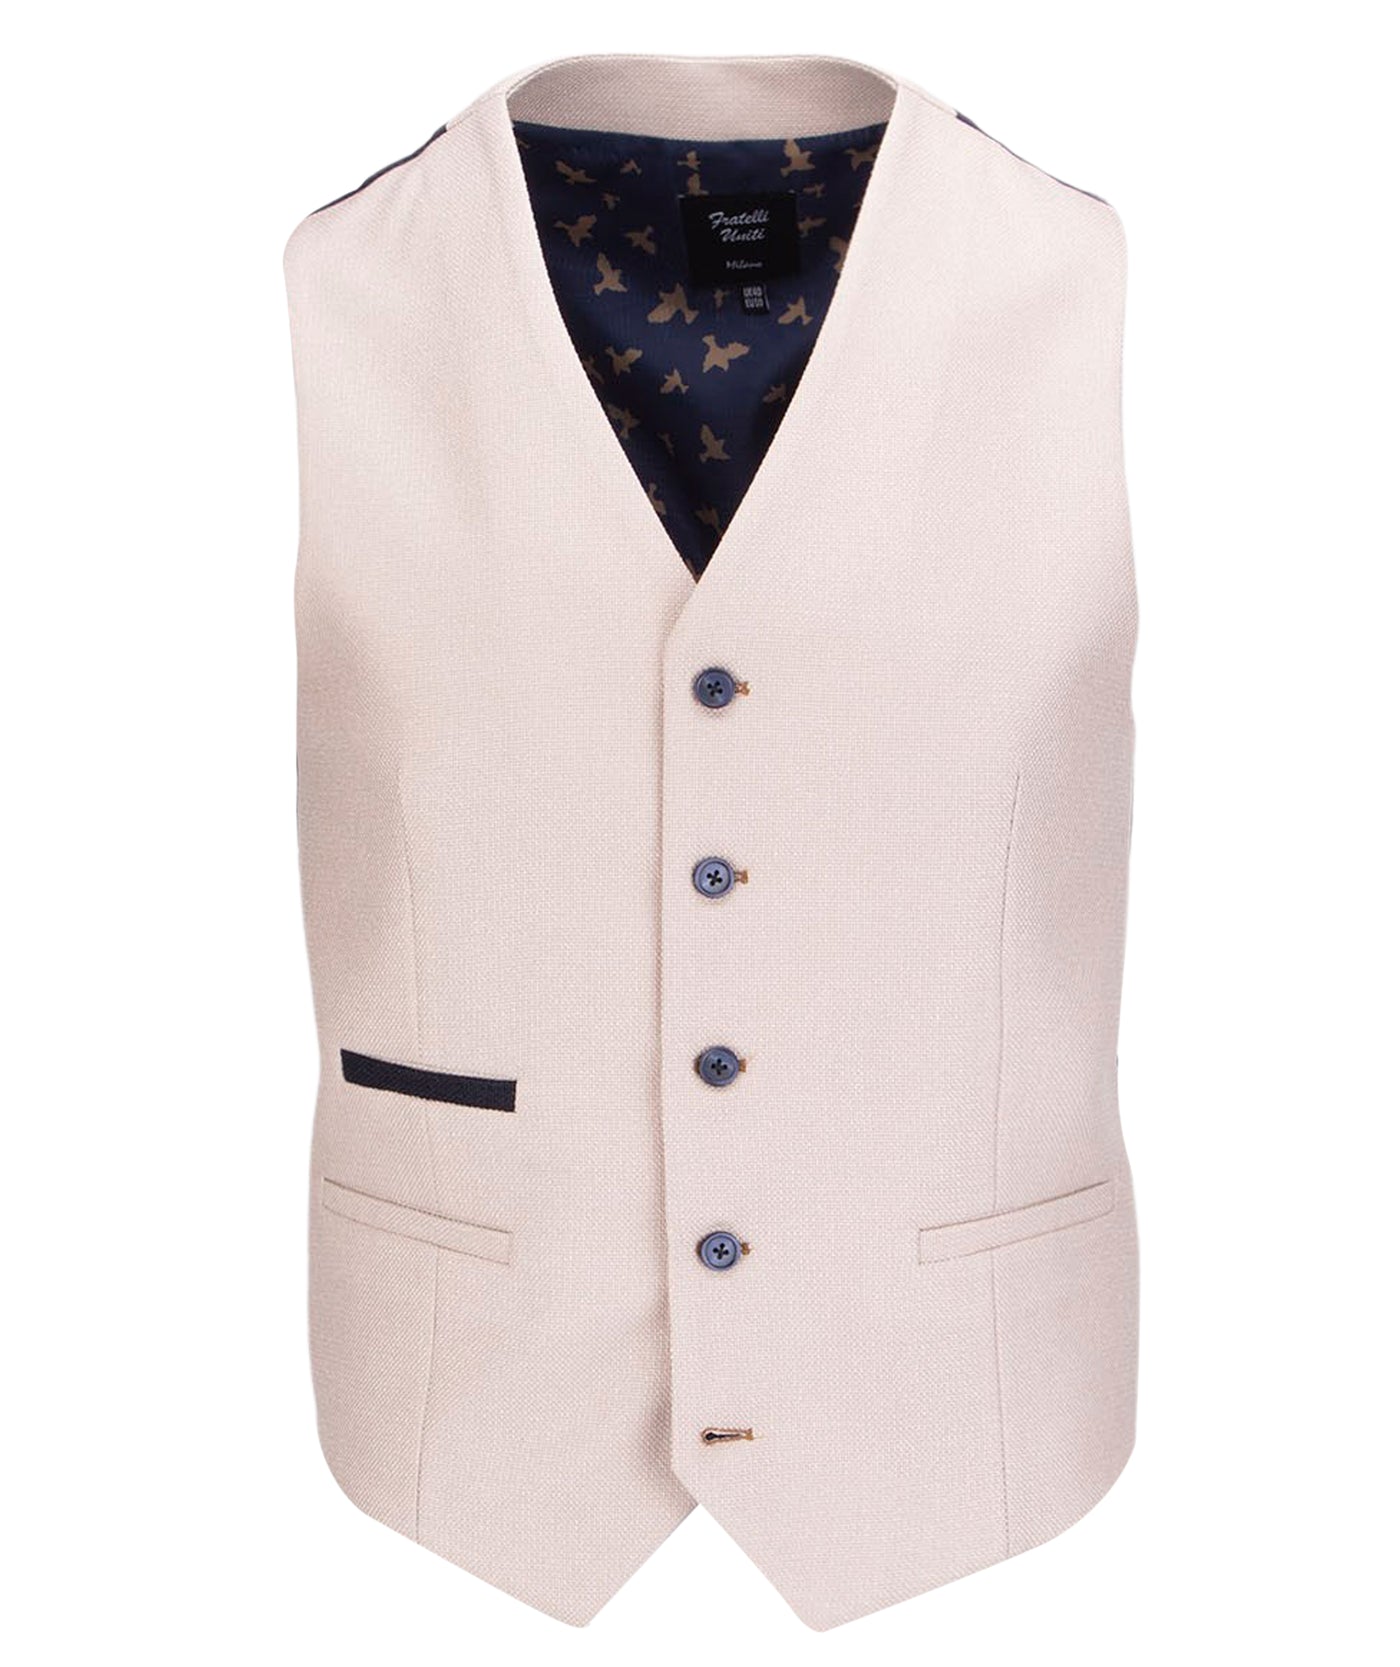 Stone Waistcoat with contrast details